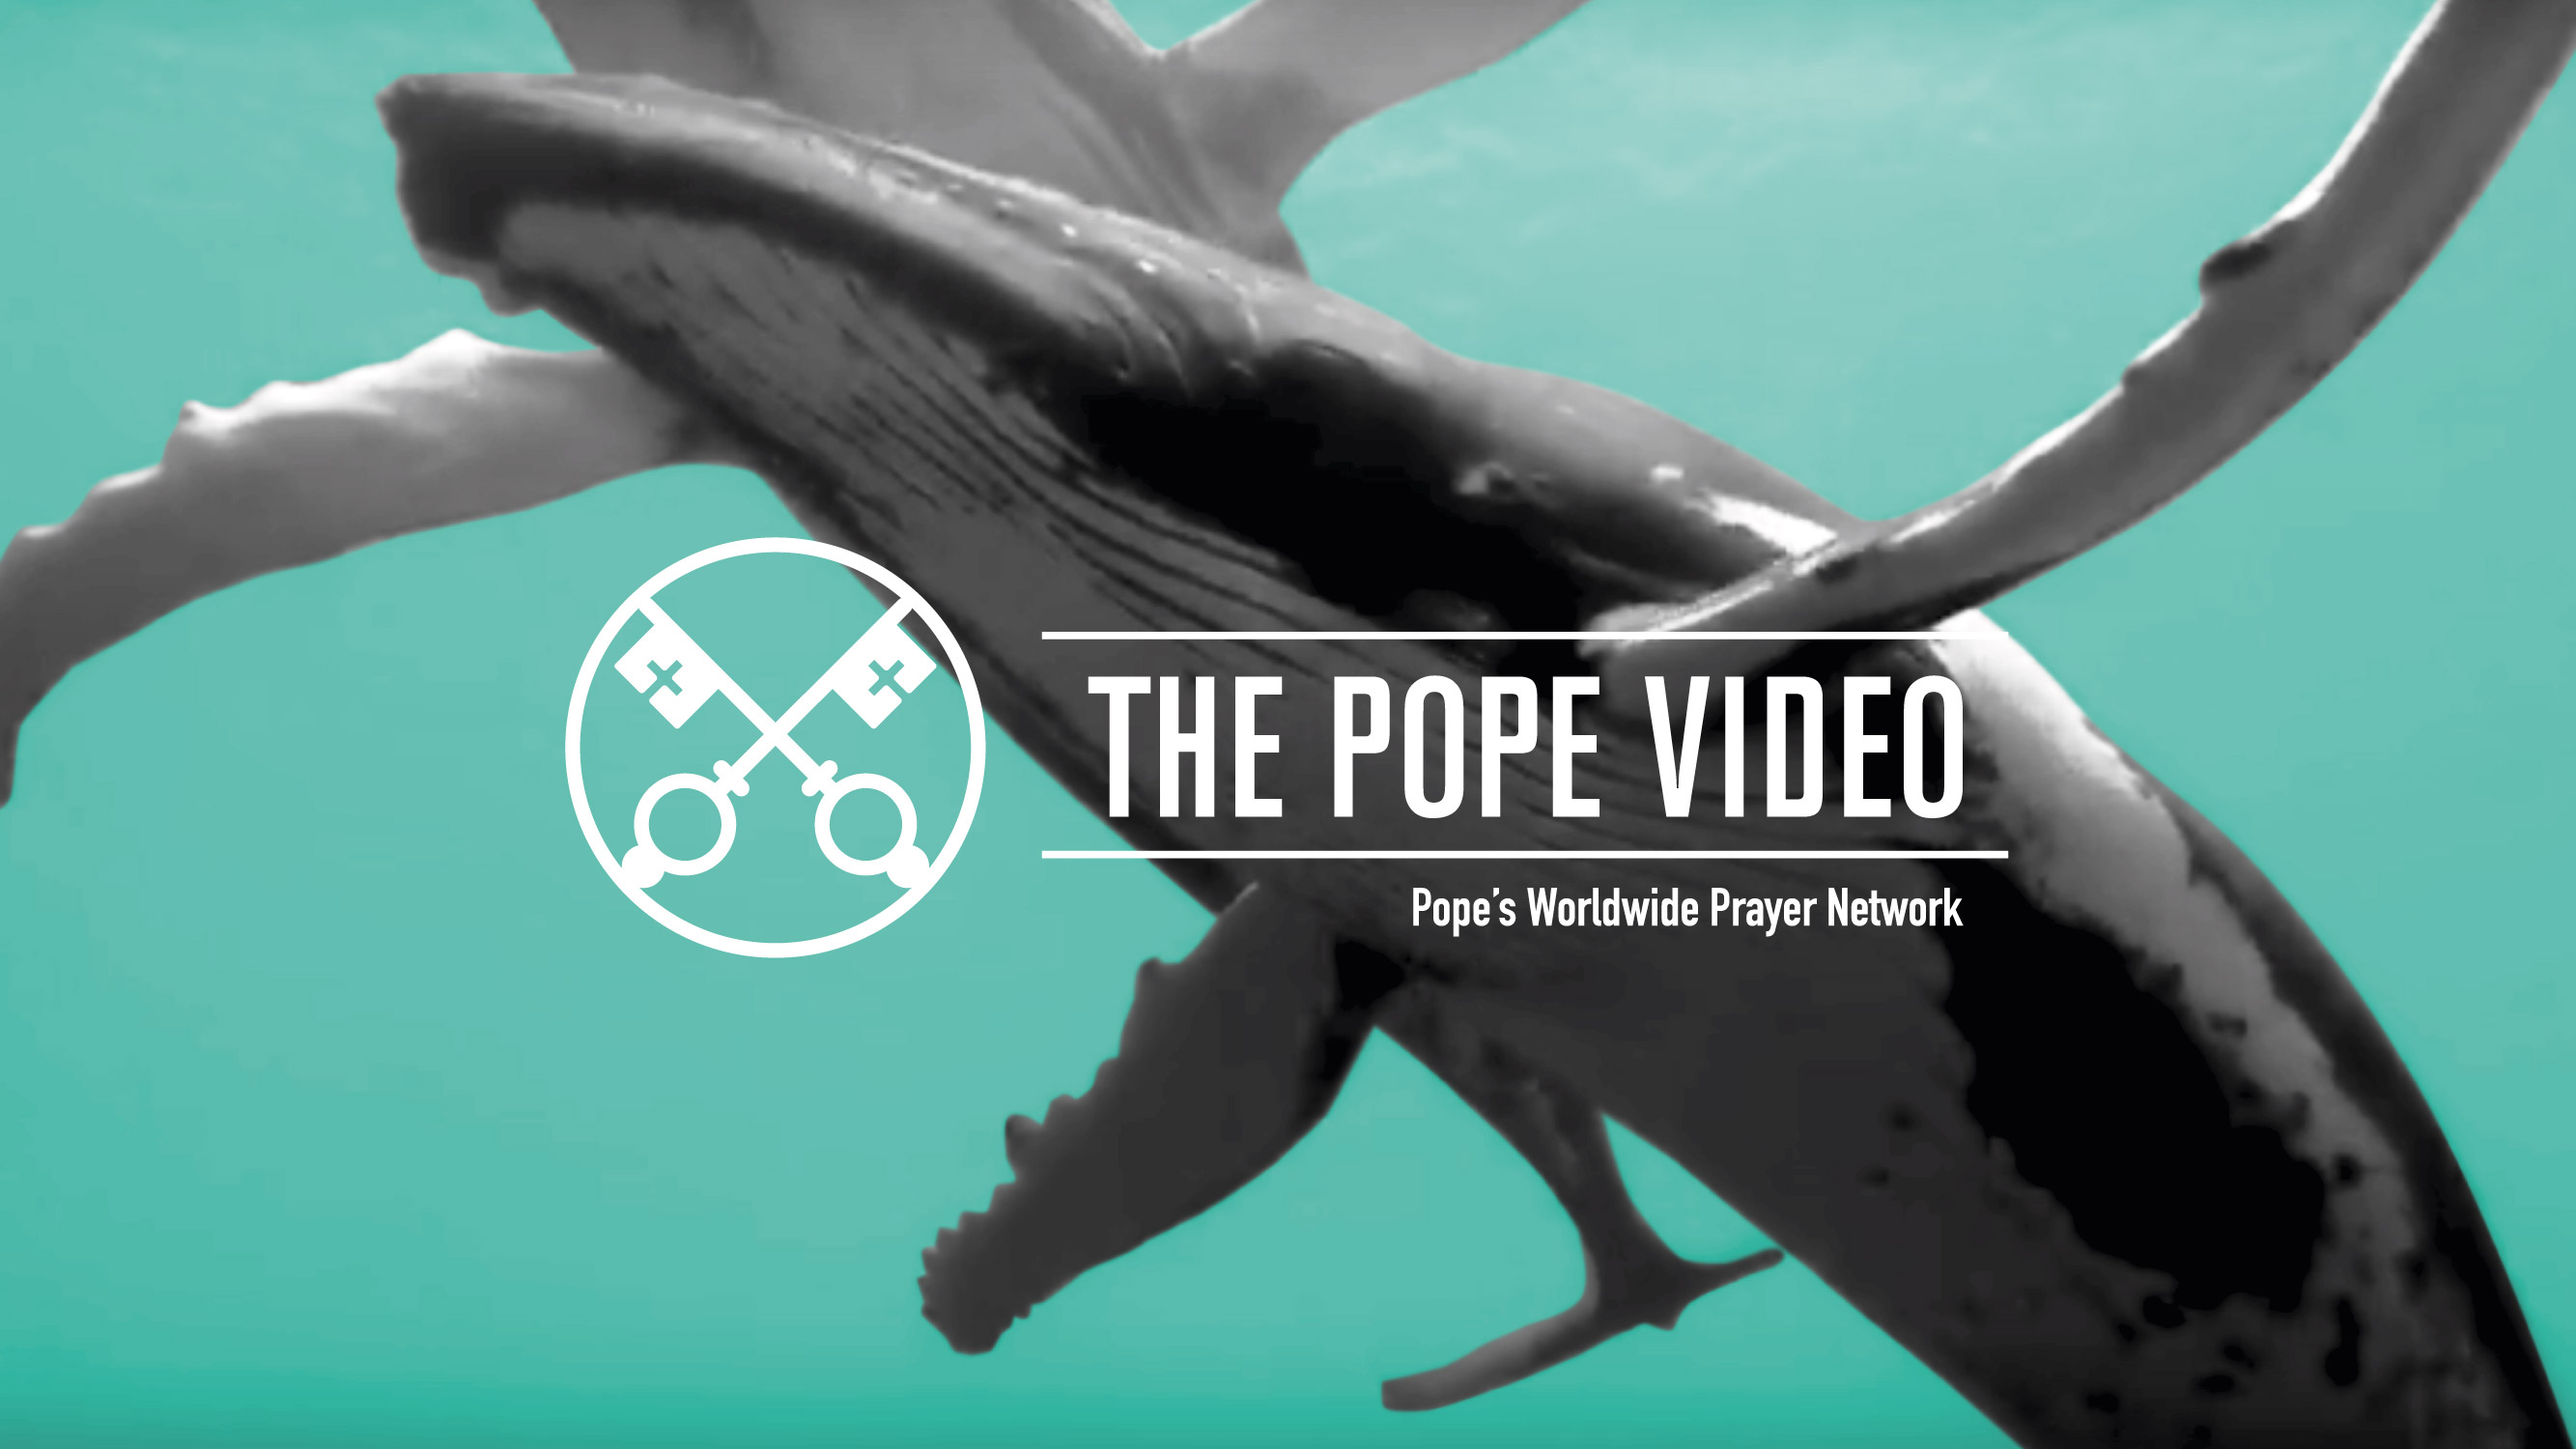 The Pope Video September 2019 (Official Image)